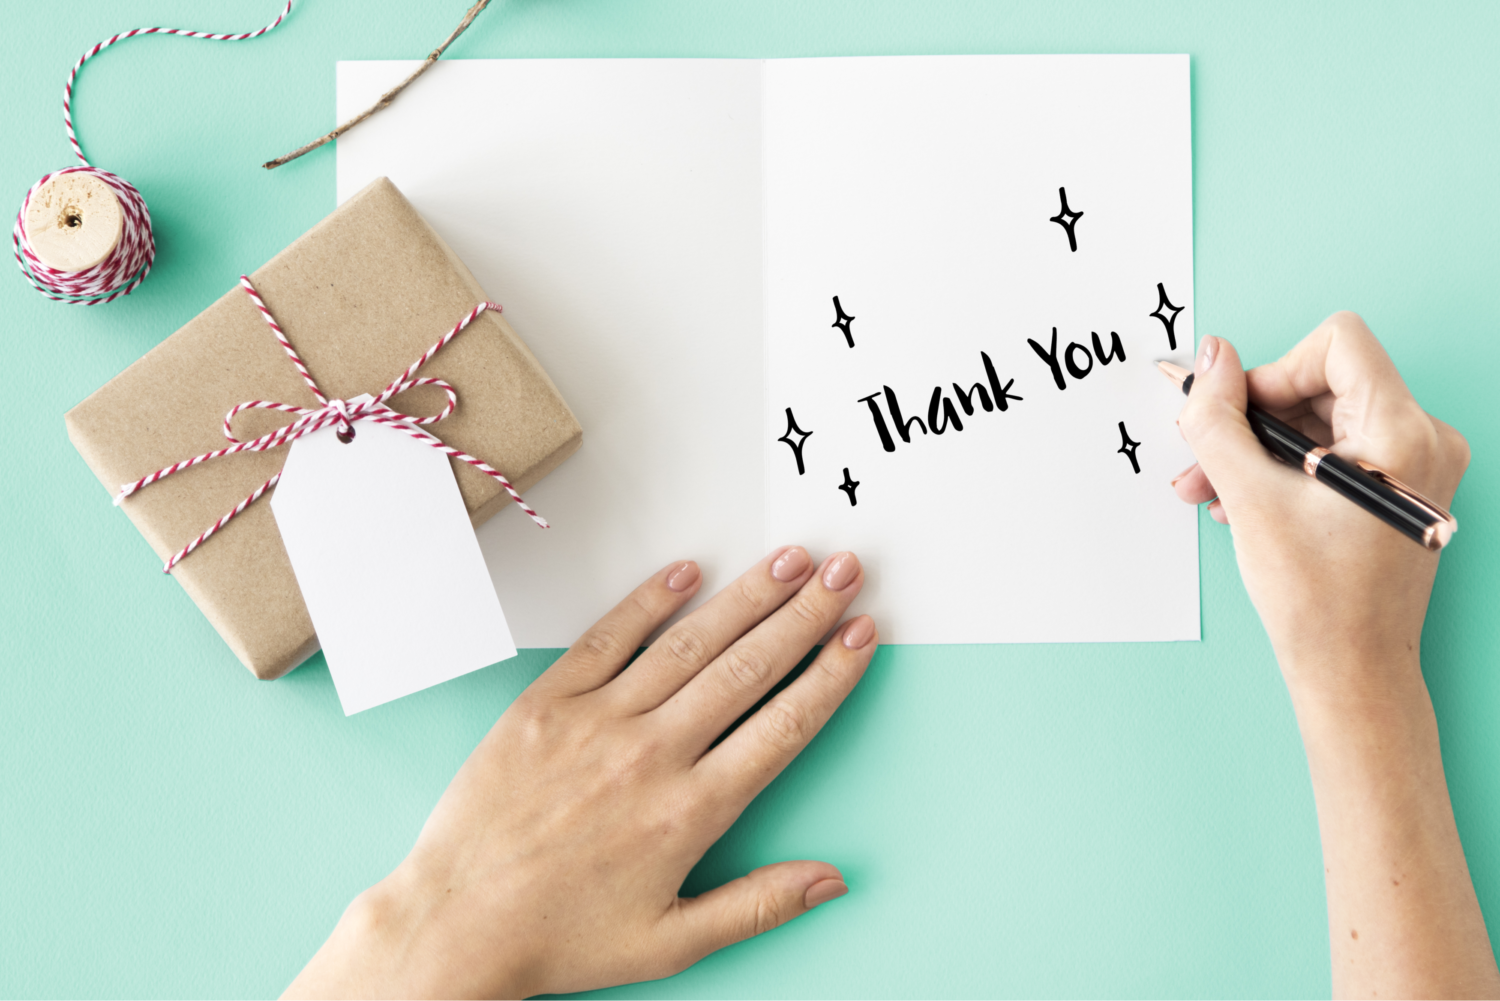 How do u say thank you to your customer in a msg just for them?